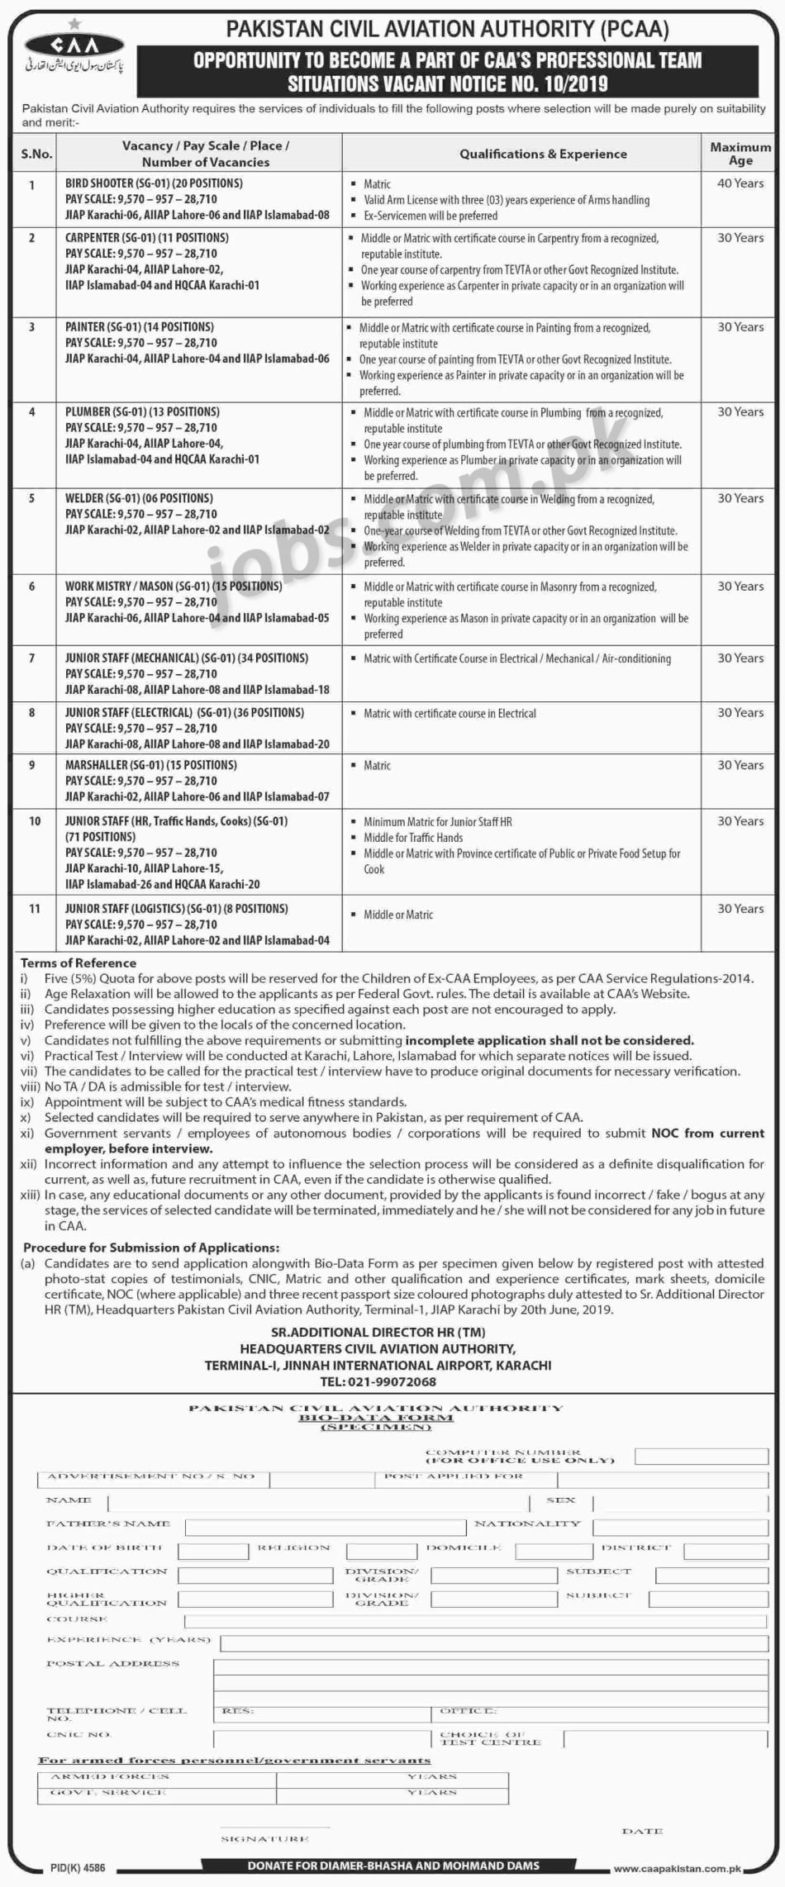 Pakistan Civil Aviation Authority (PCAA) Jobs 2019 For 243+ Posts In Multiple Categories (Islamabad, Lahore, Karachi)